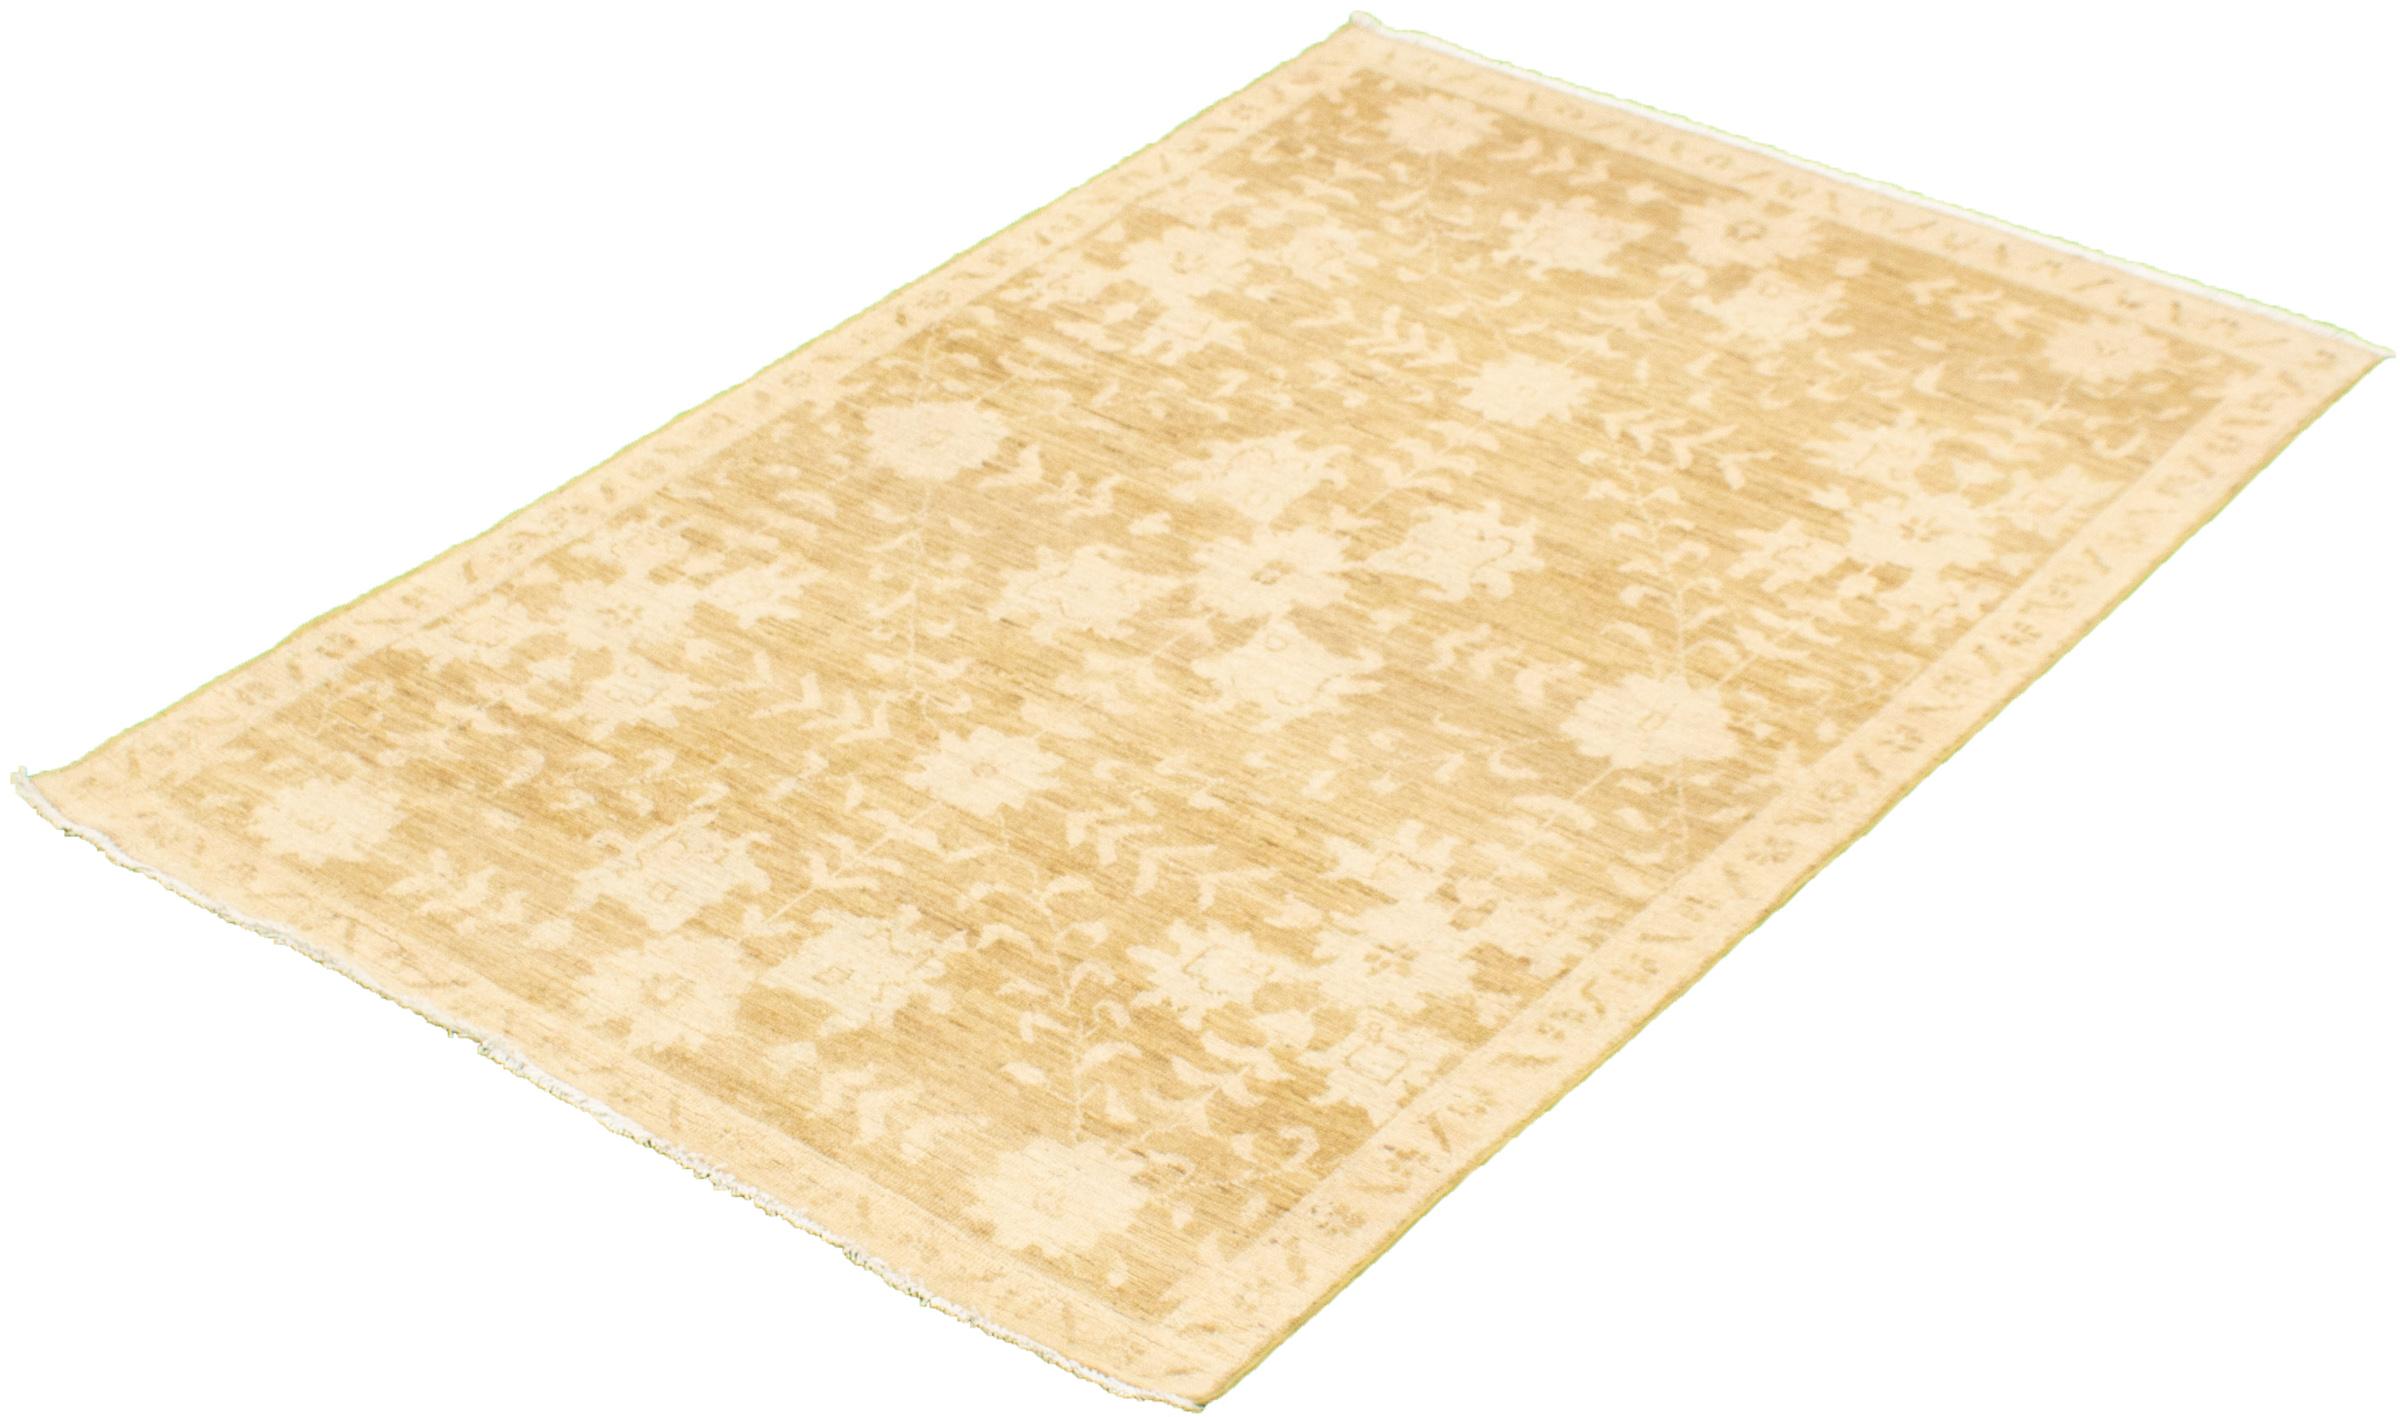 In delicate shades of light brown and neutral cream wool, this hand-knotted Oushak carpet measures 4'1